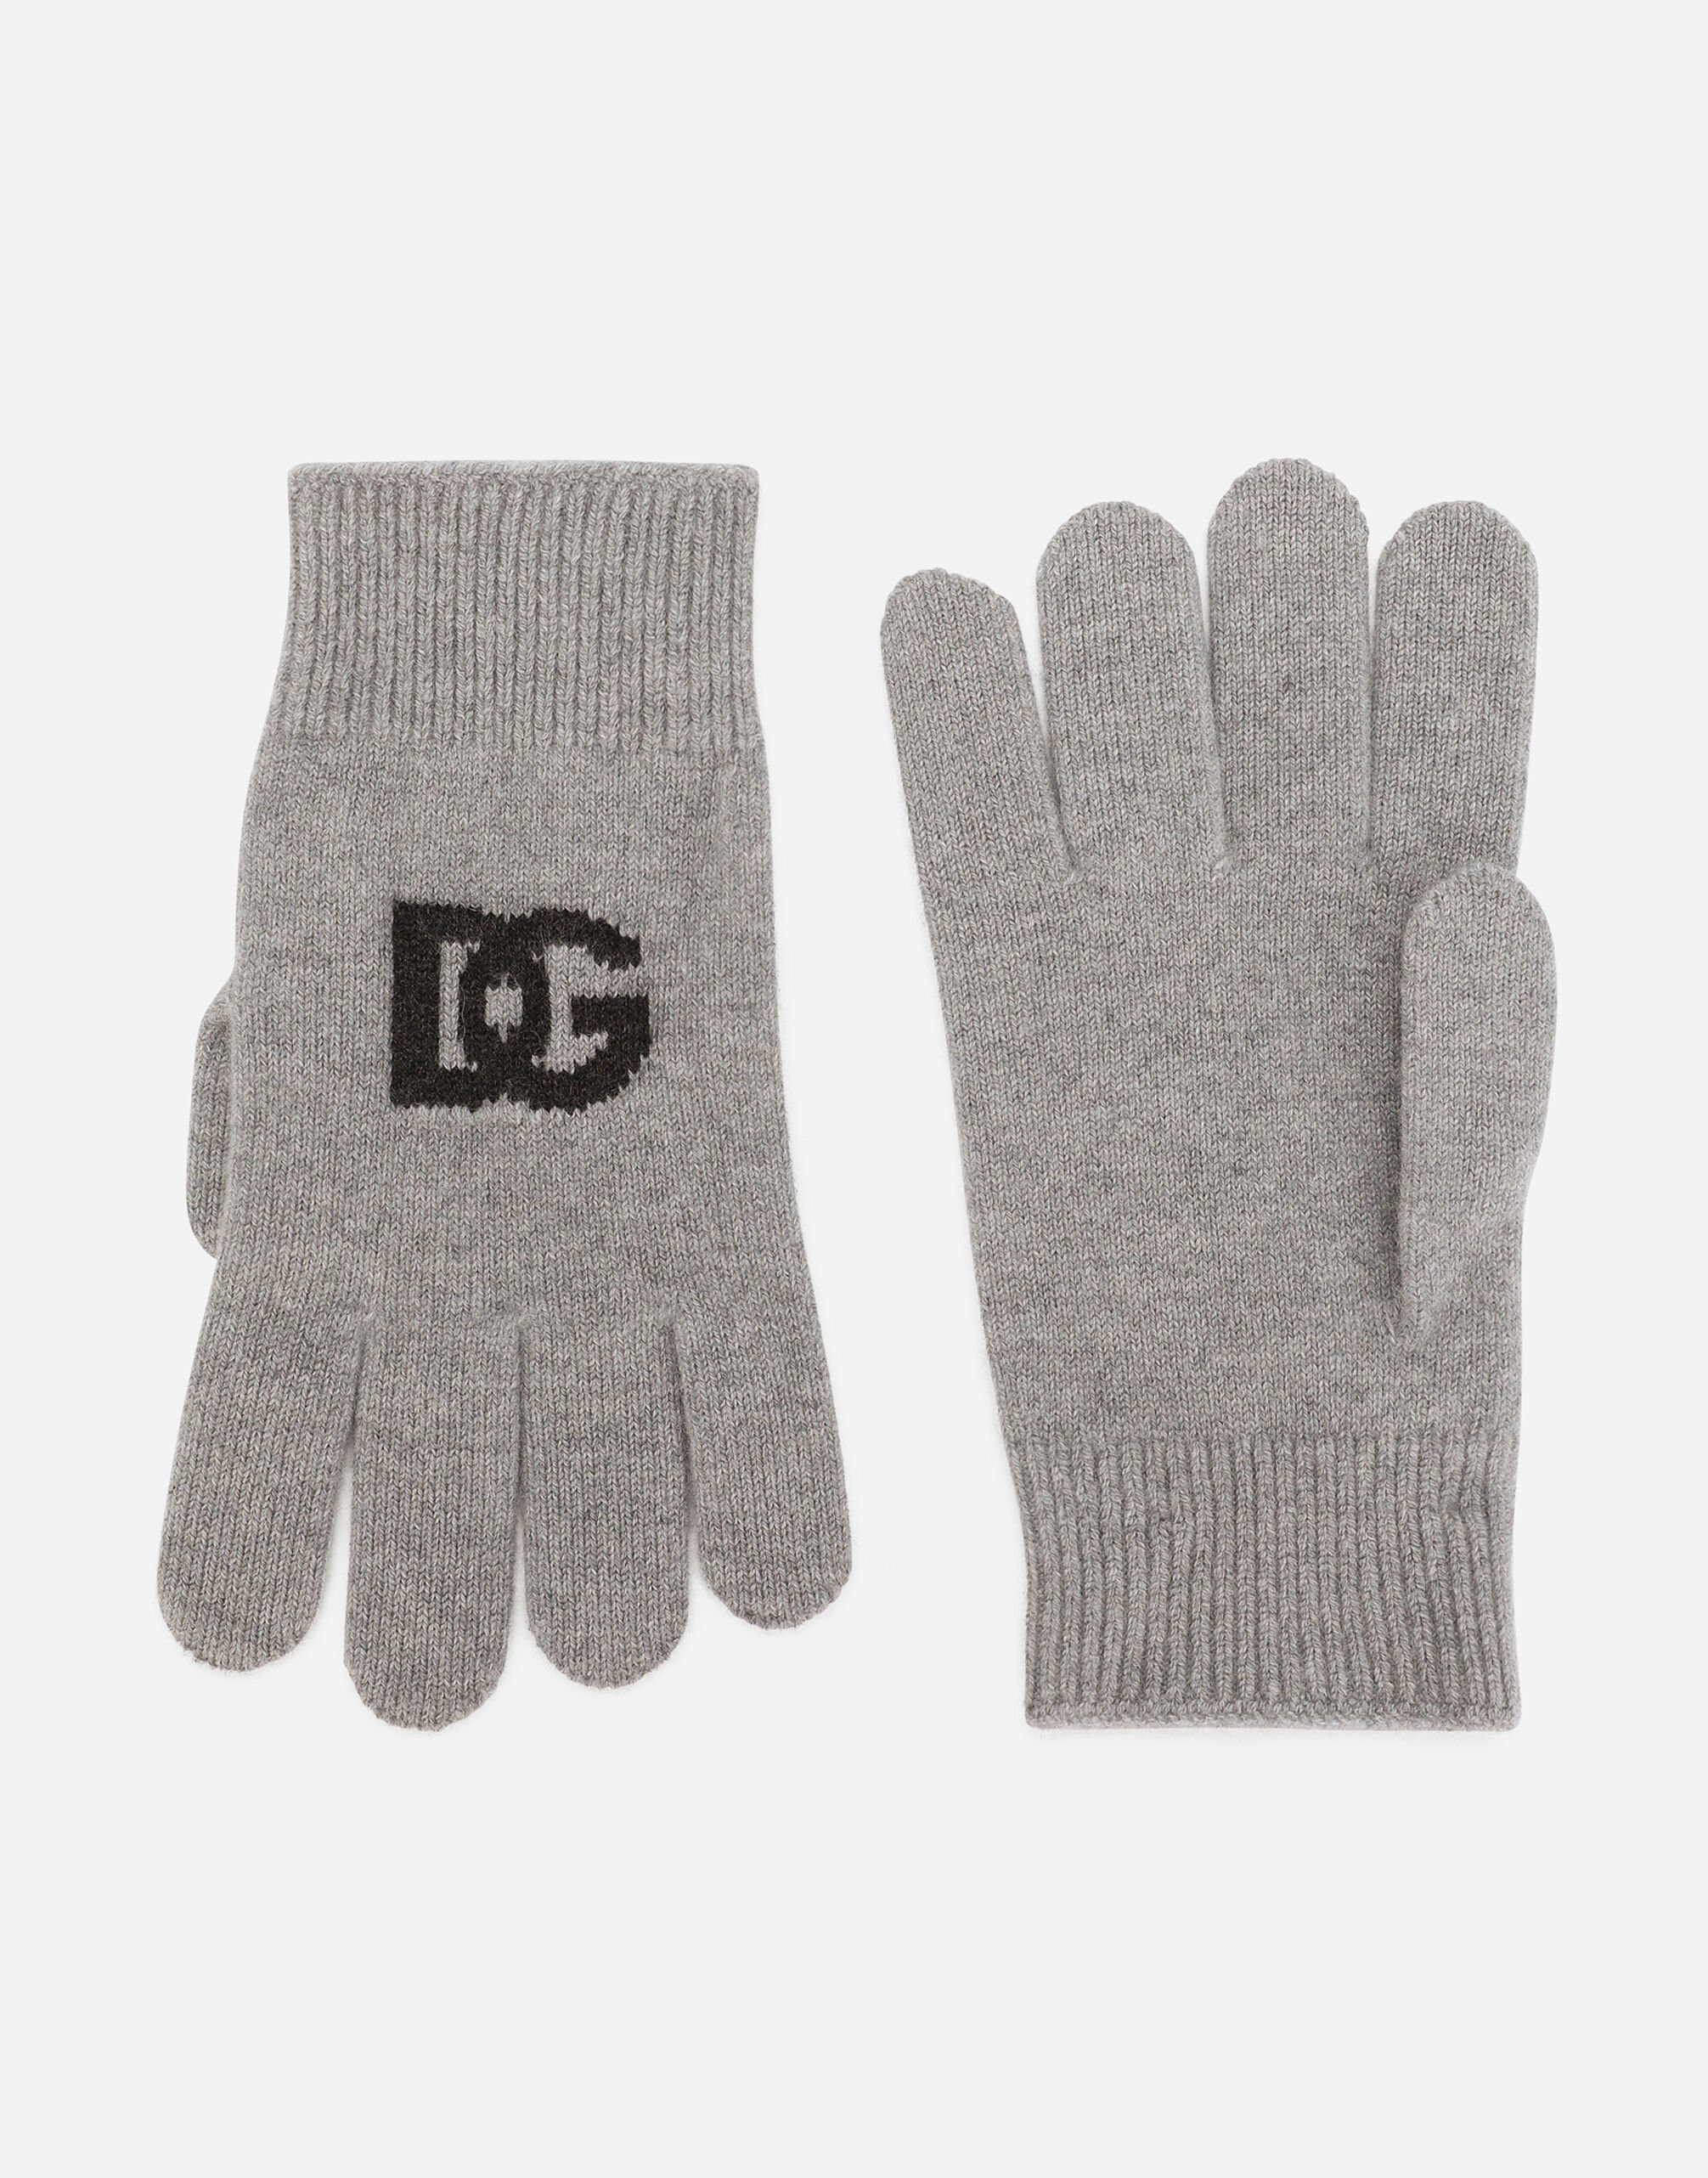 ${brand} Cashmere gloves with DG logo ${colorDescription} ${masterID}